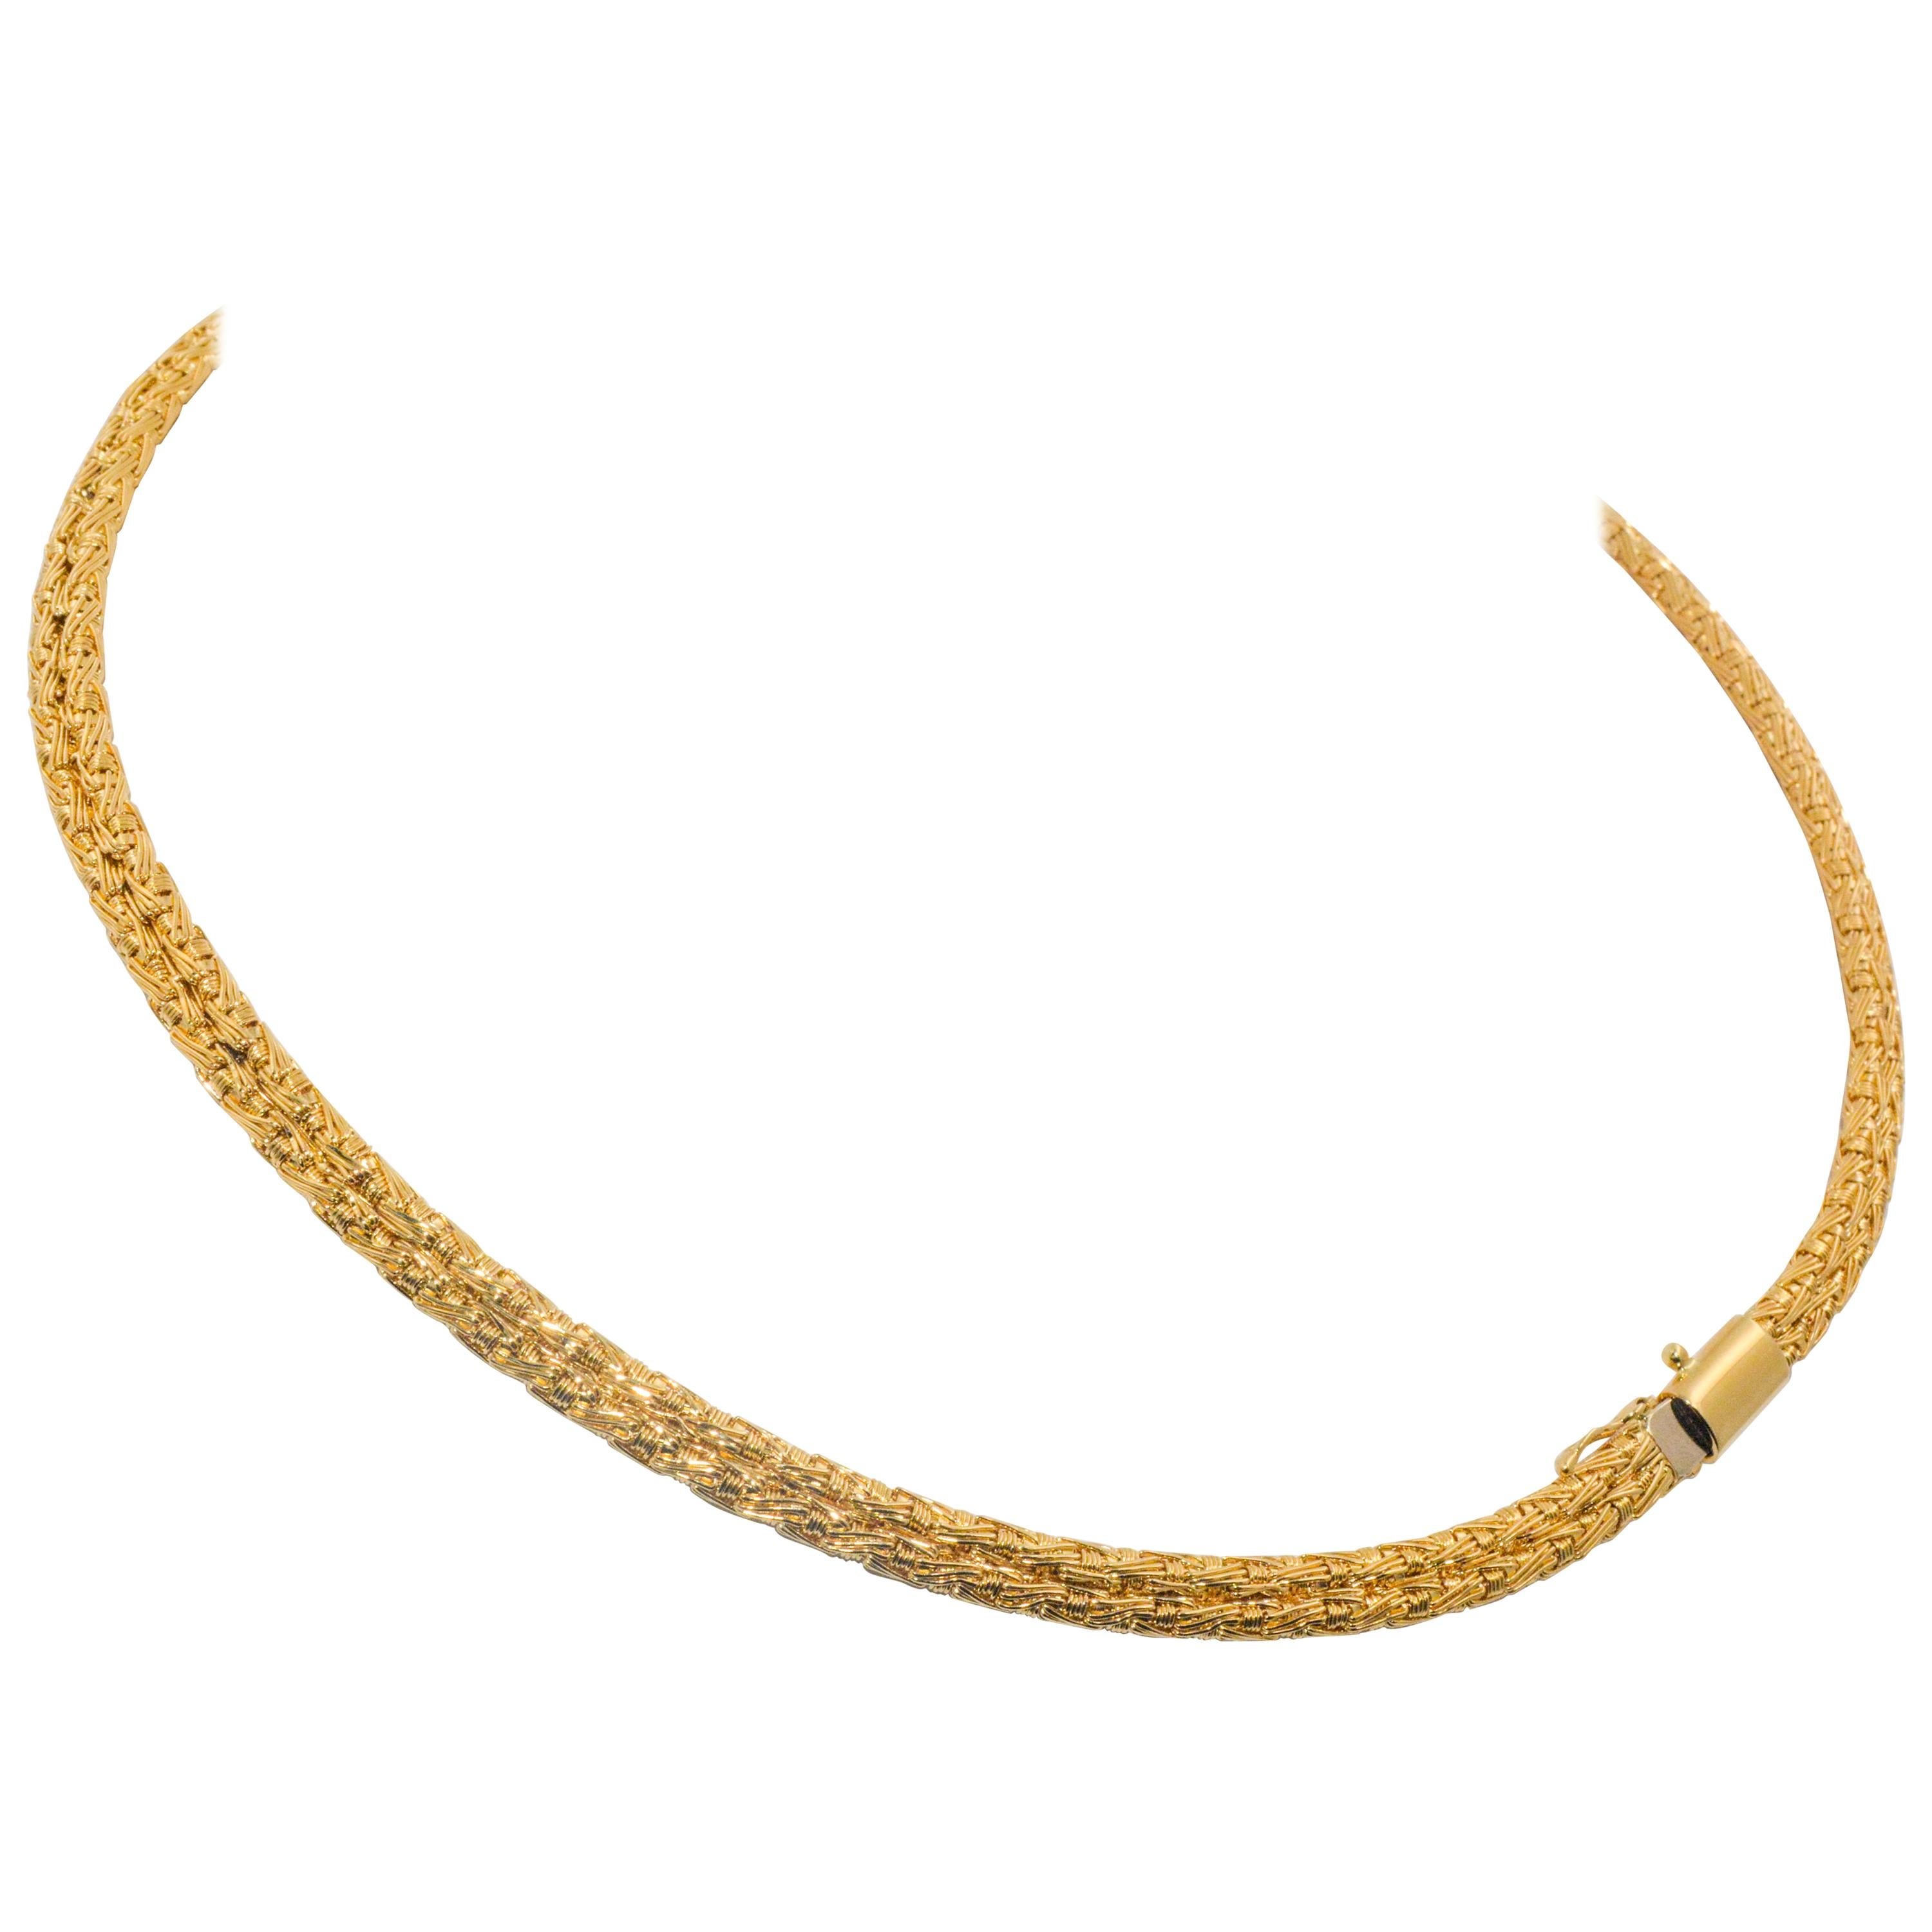 In a Greek Byzantine style, designer LLias Lalacounis weaves an incredible necklace collar. Lightweight and glamorous yet substantial enough to feel regal, this collar is stunning in 18 karat  yellow gold. 17 inches in length.